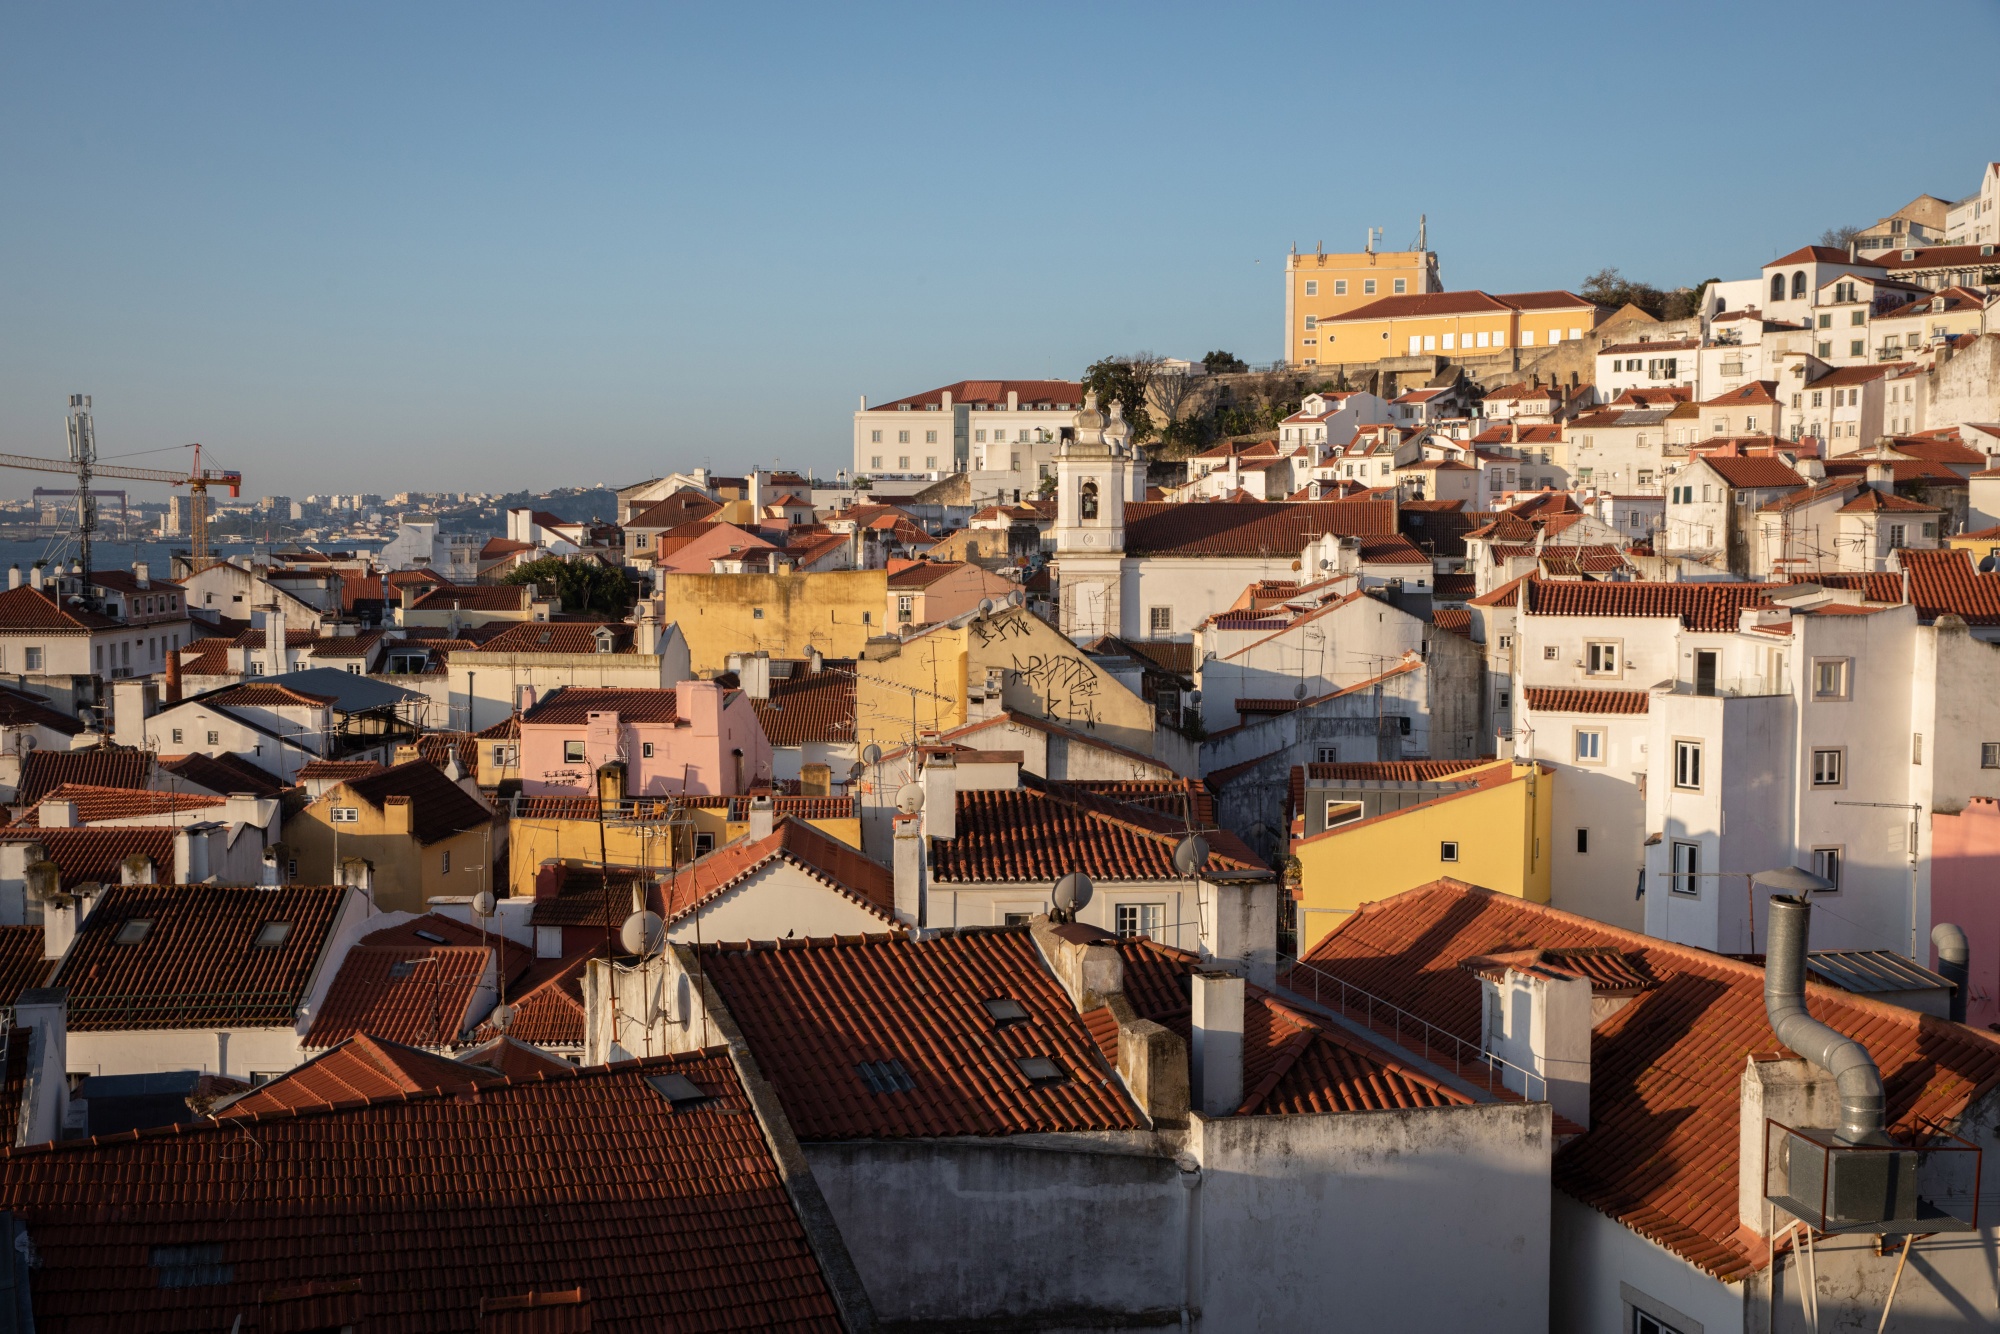 Residential buildings on the skyline in Lisbon, Portugal.